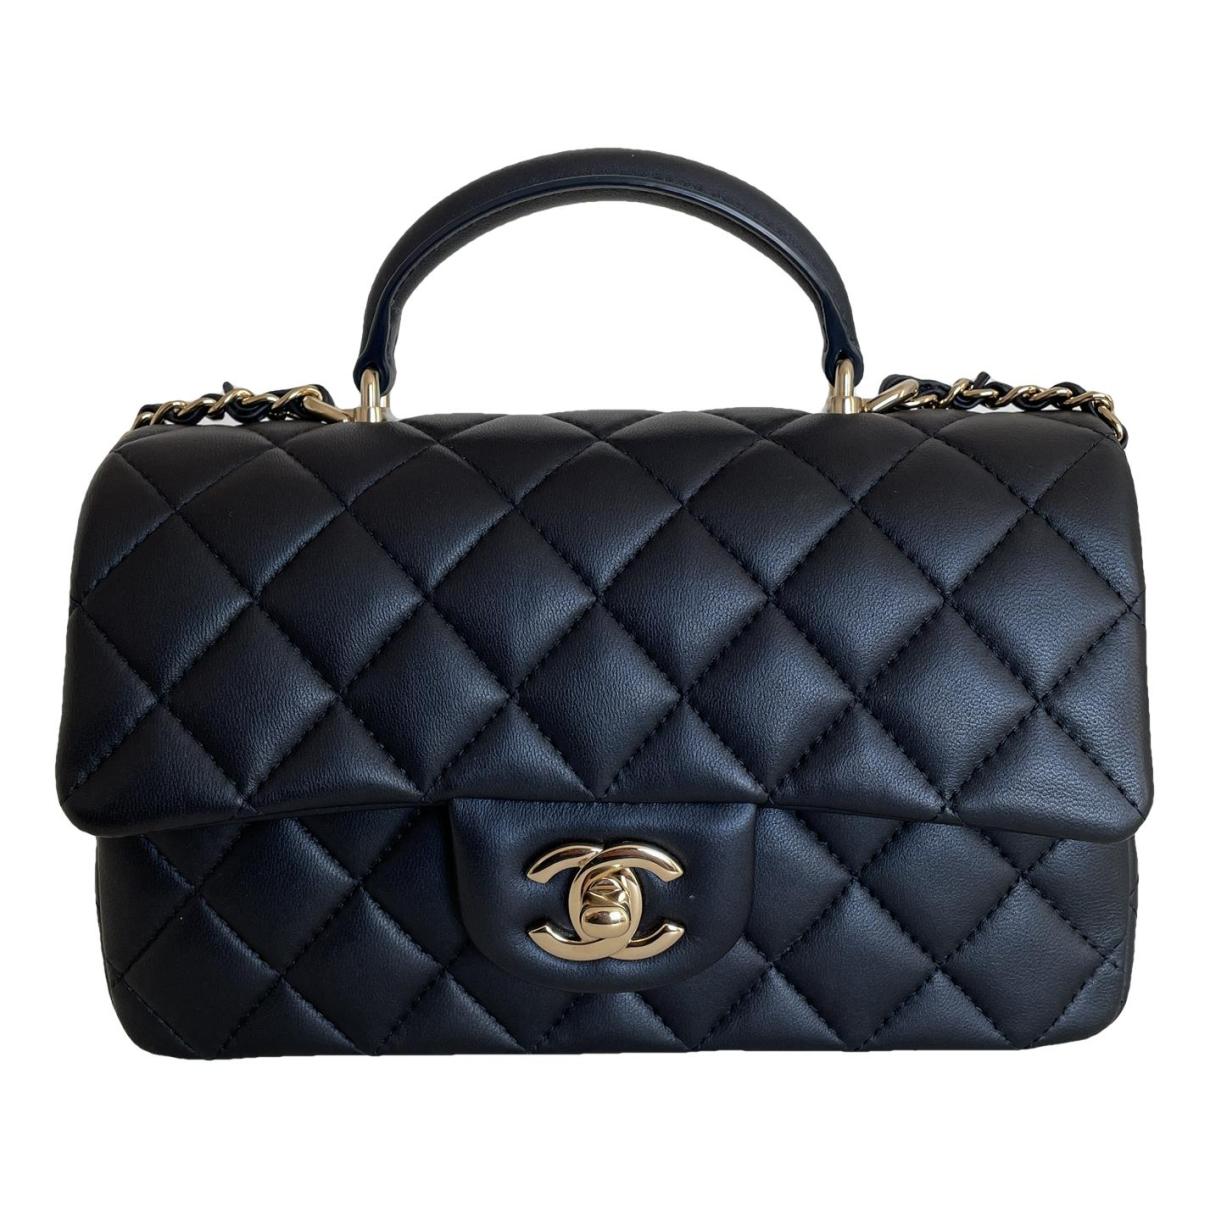 Timeless/classique leather handbag Chanel Black in Leather - 35979934